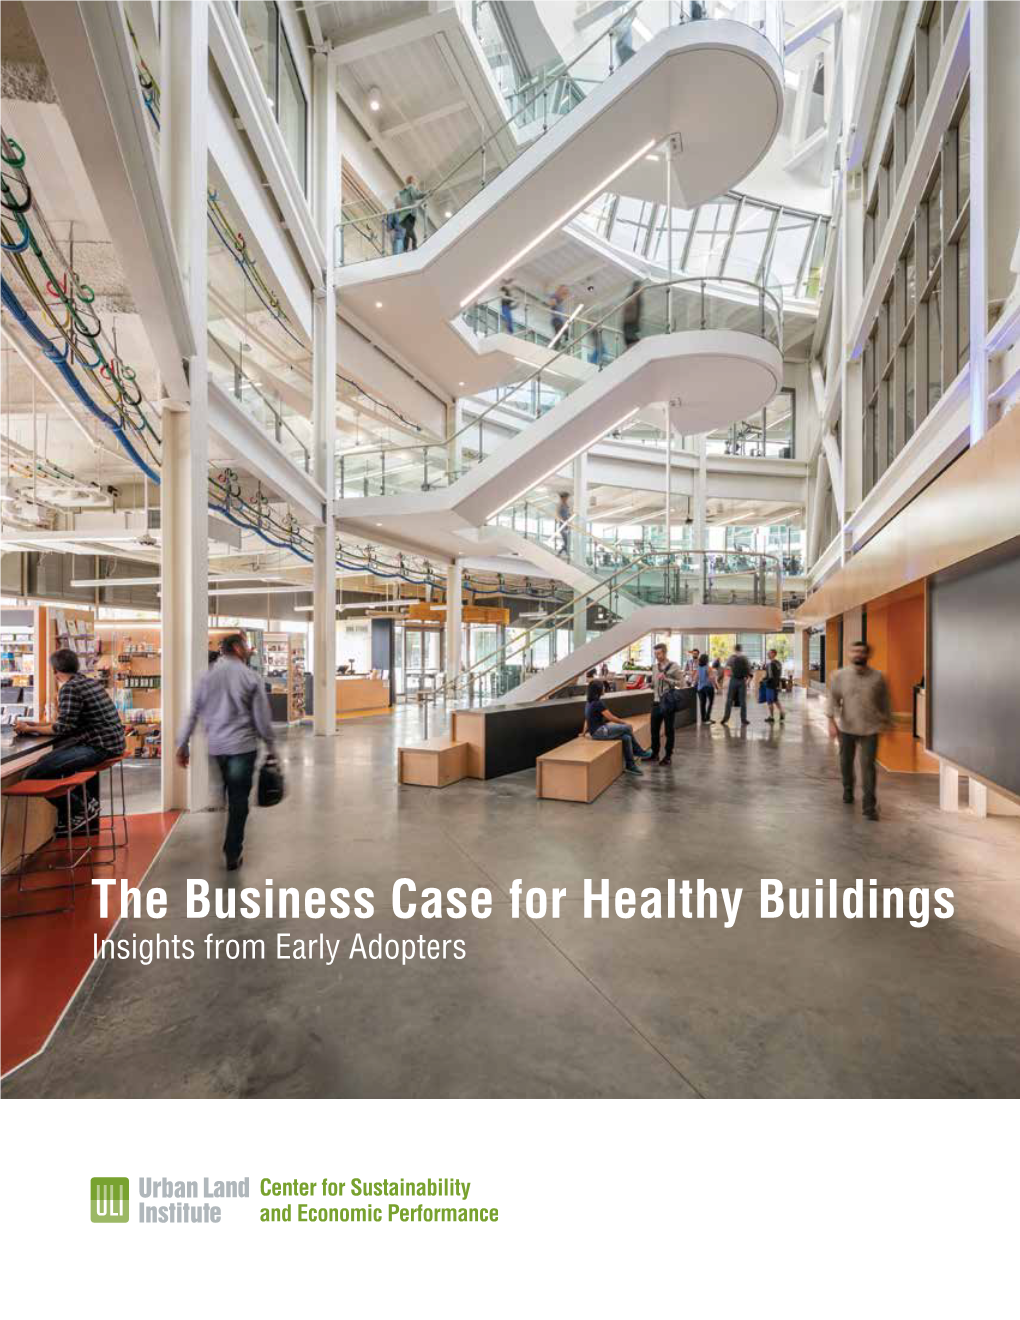 The Business Case for Healthy Buildings